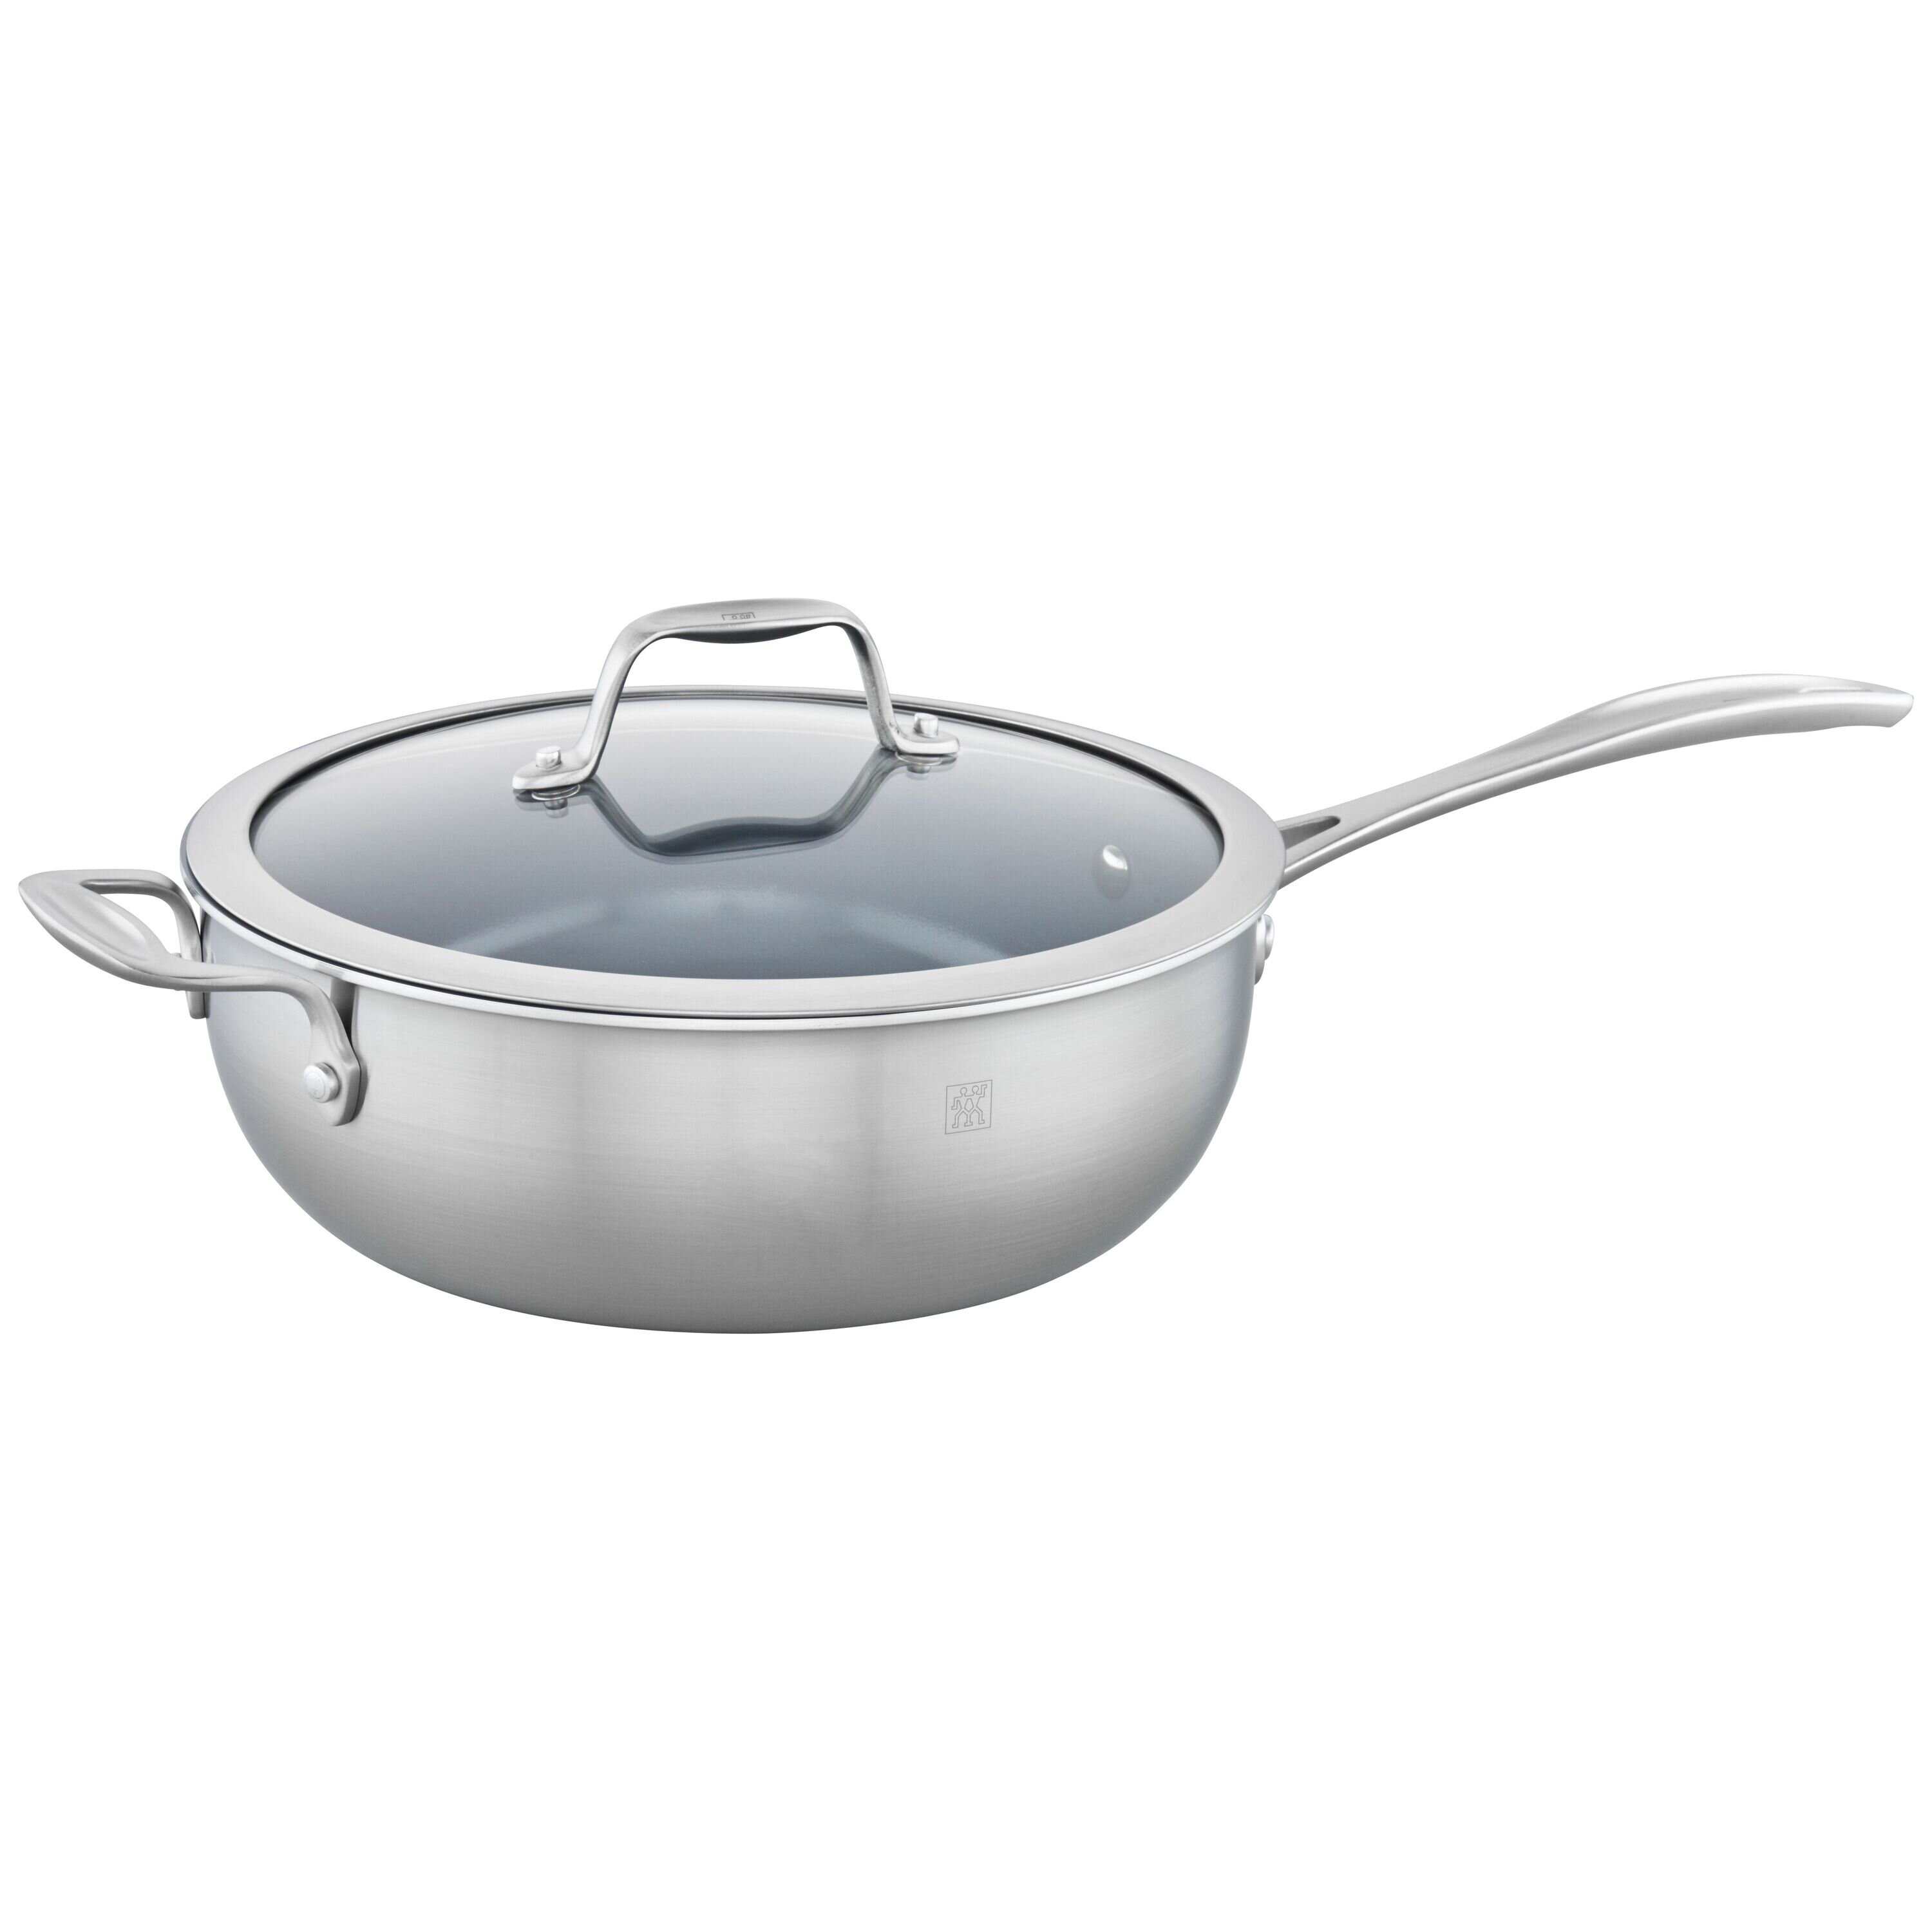 Zwilling JA Henckels 3 qt. Stainless Steel Saute Pan with Lid & Reviews